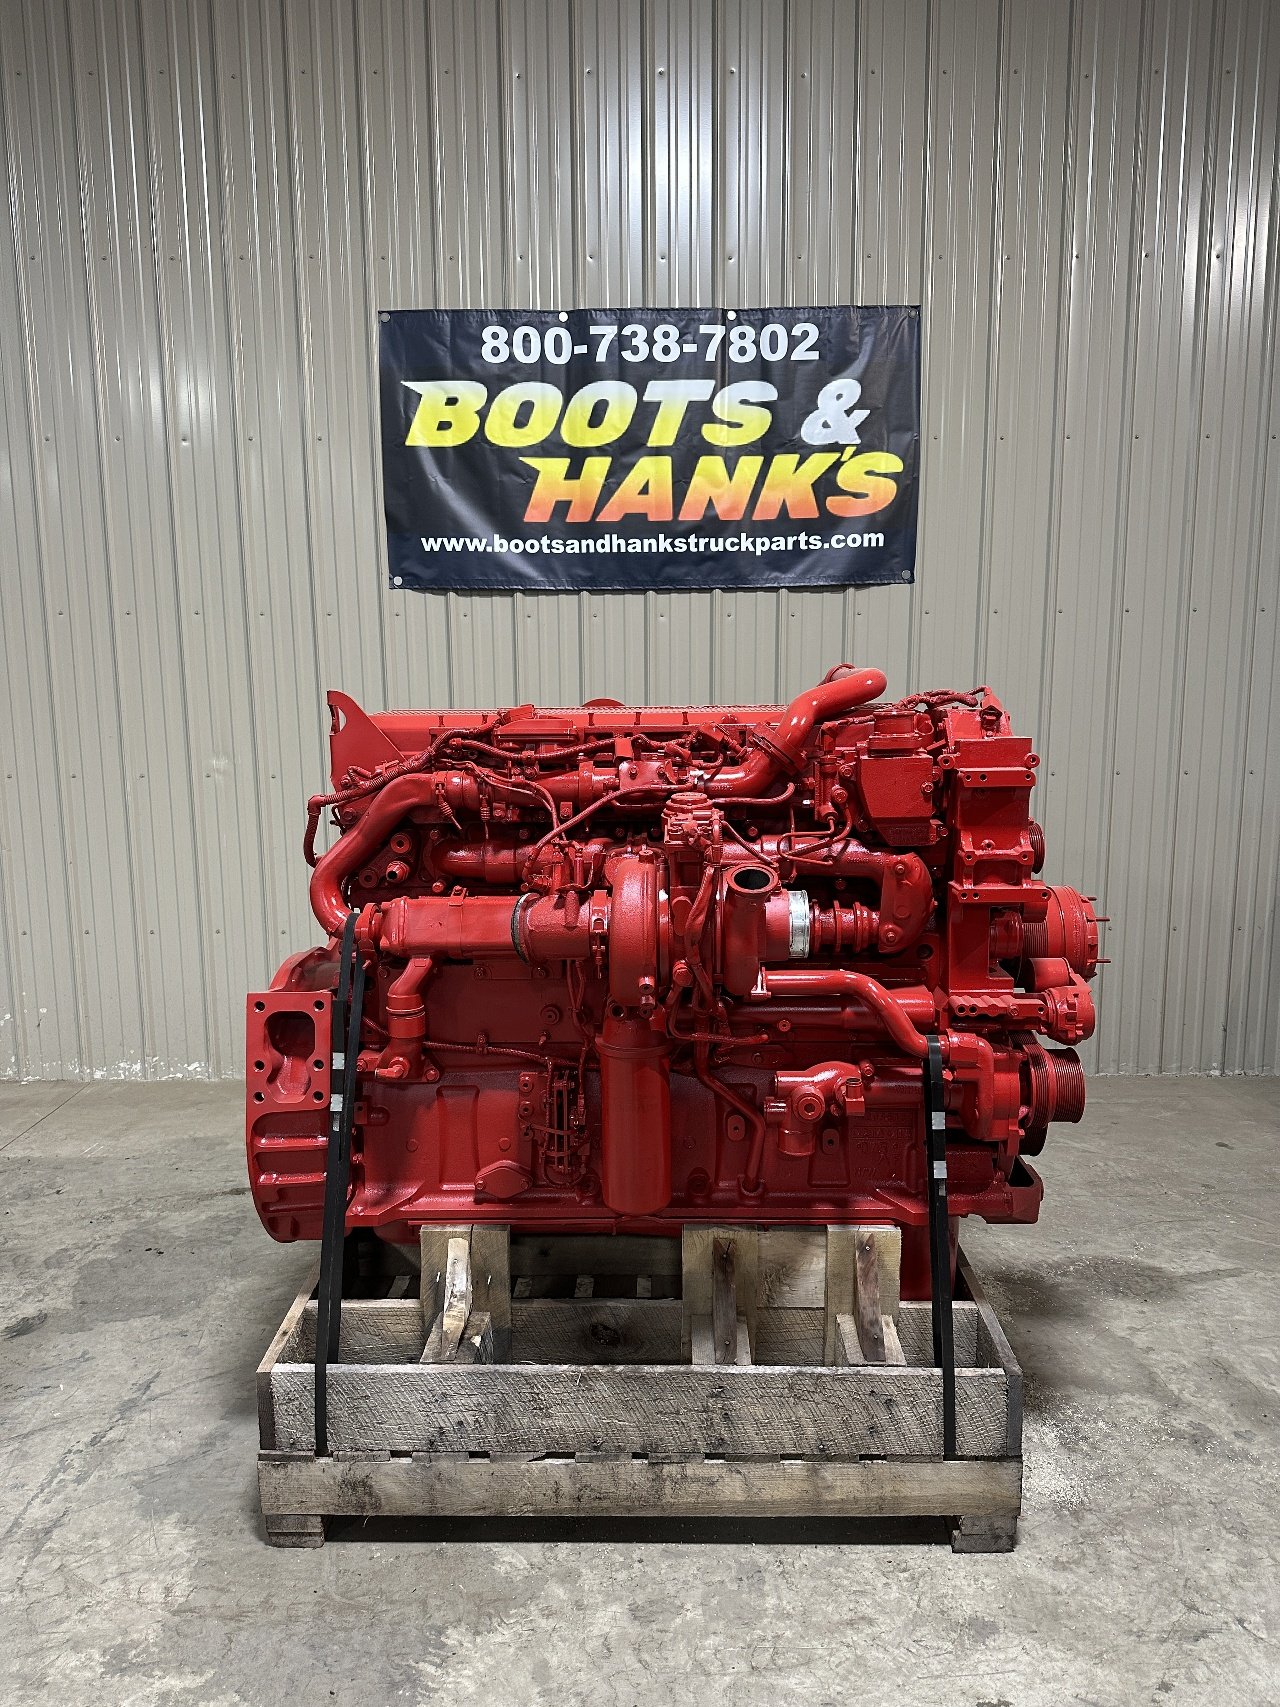 USED 2015 CUMMINS ISX15 COMPLETE ENGINE TRUCK PARTS #2015